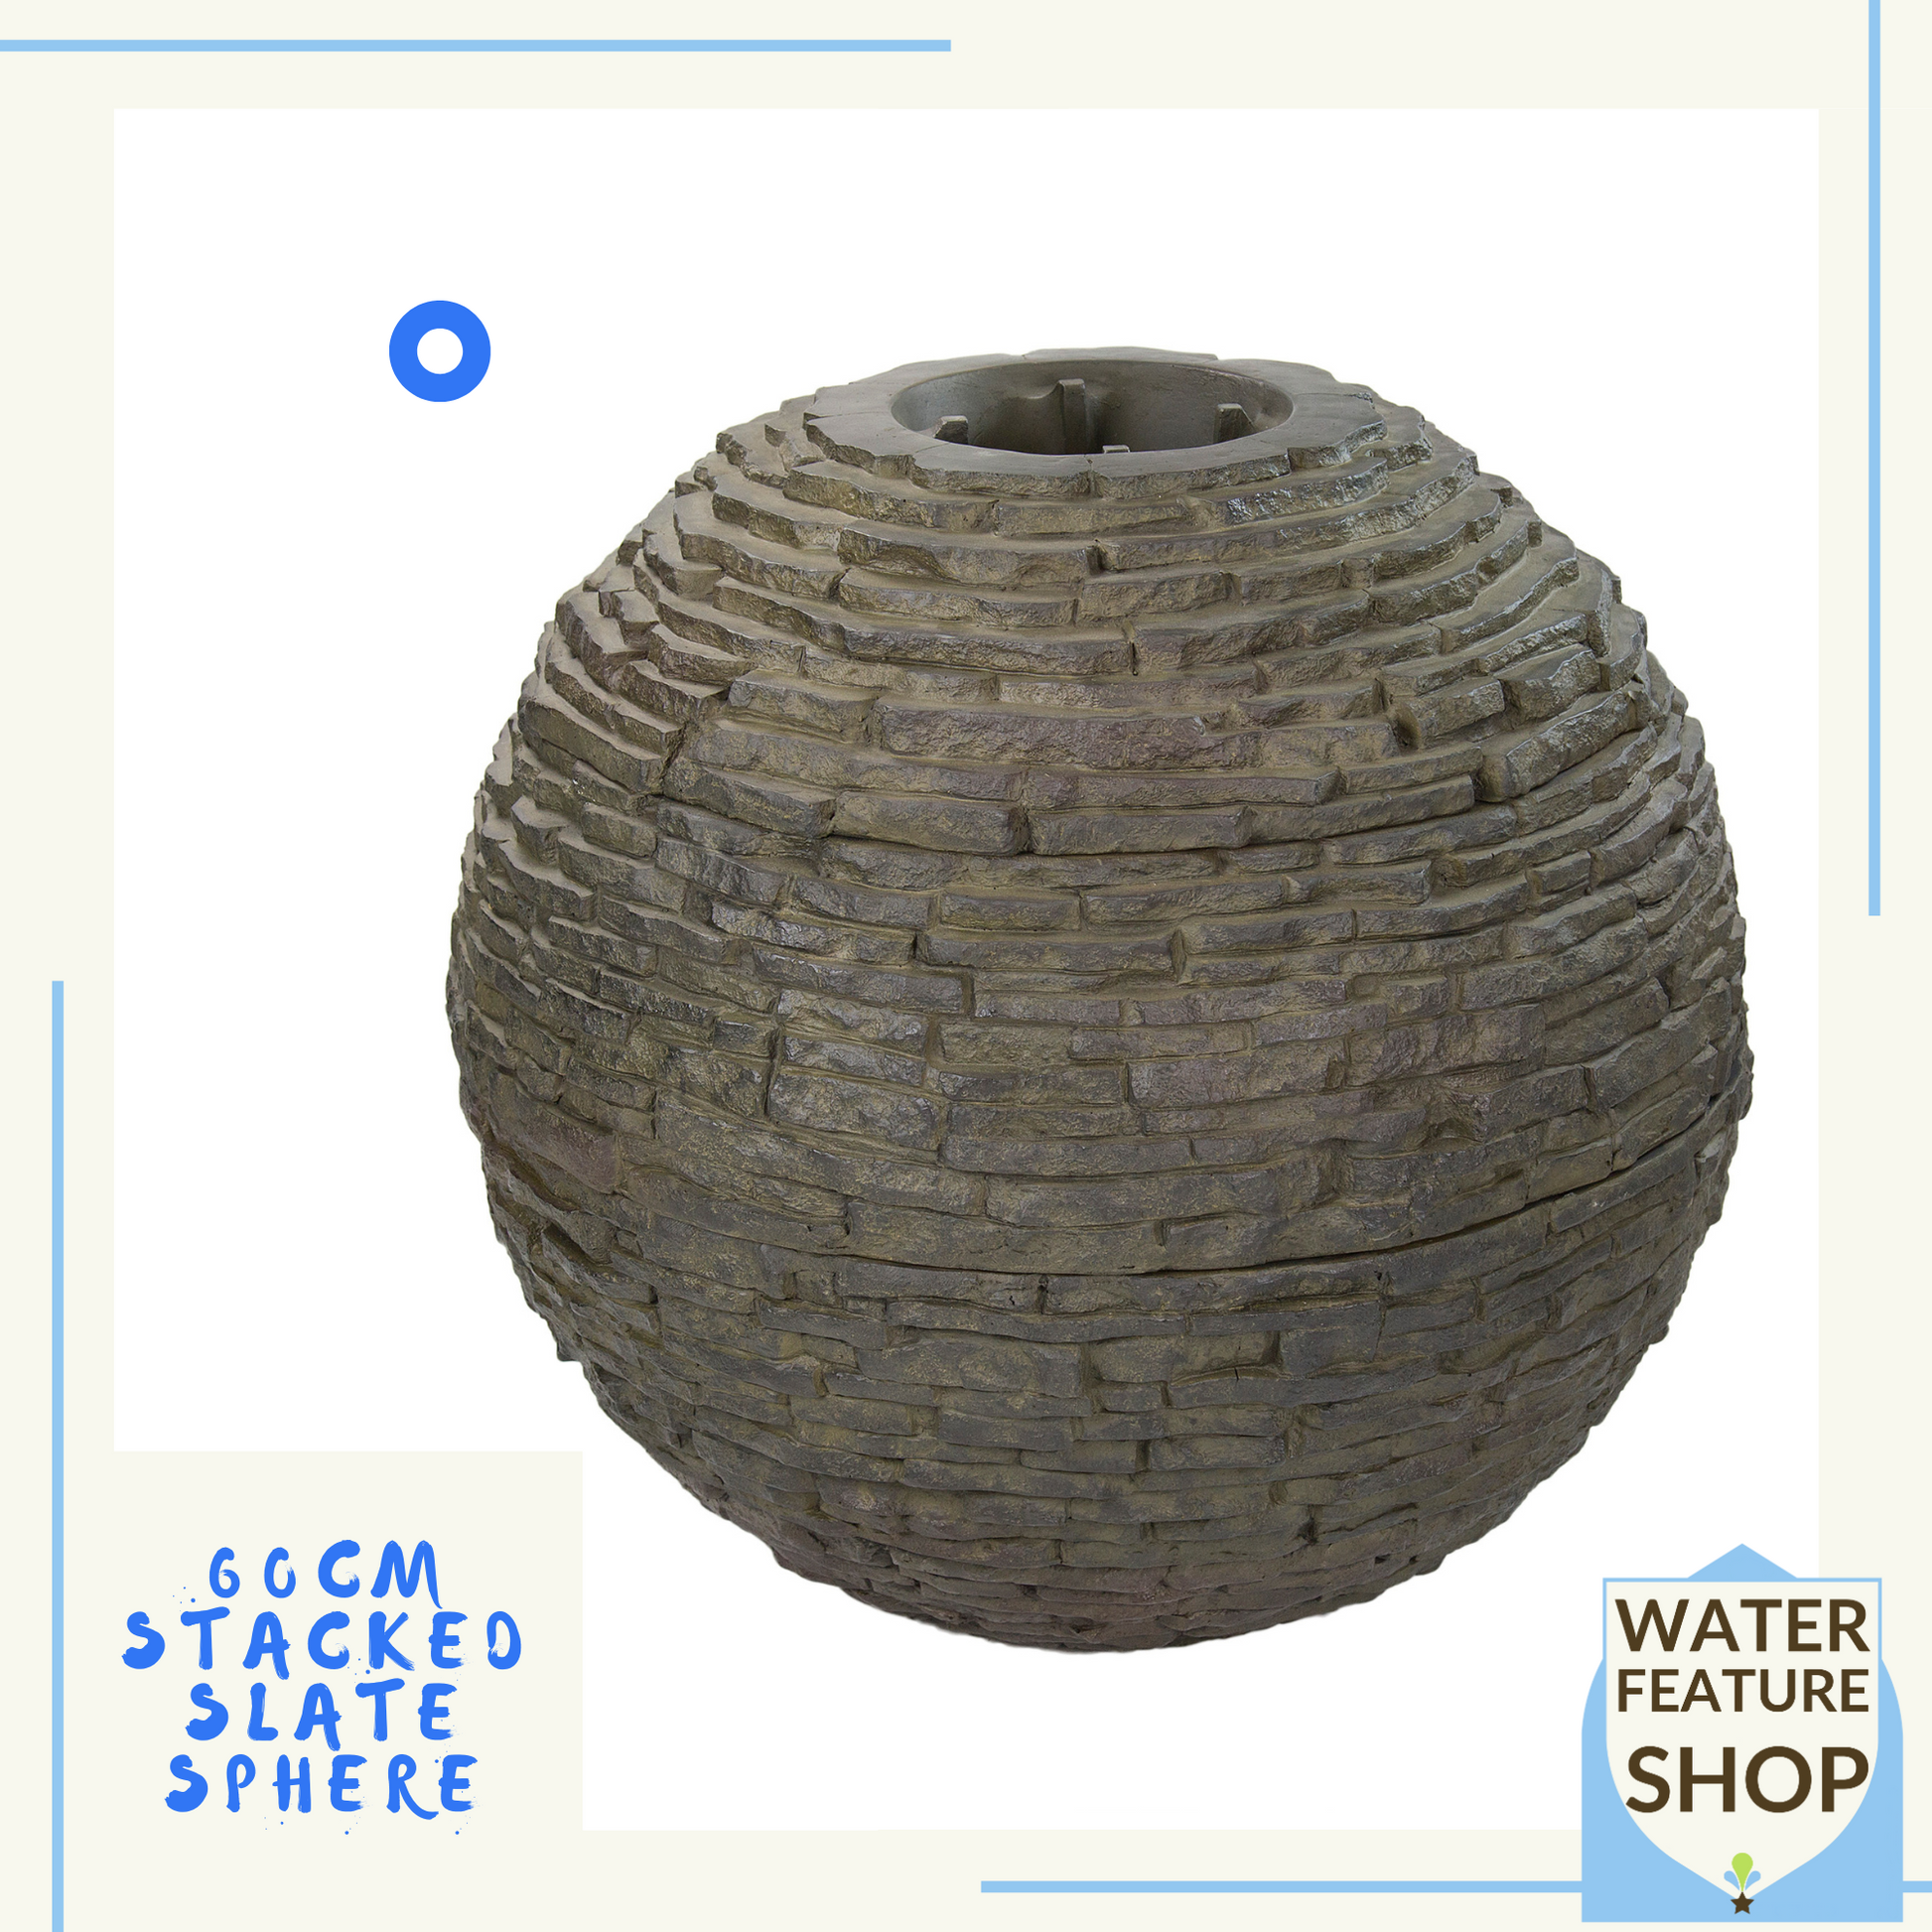 Stacked Slate Sphere - Garden Water Feature